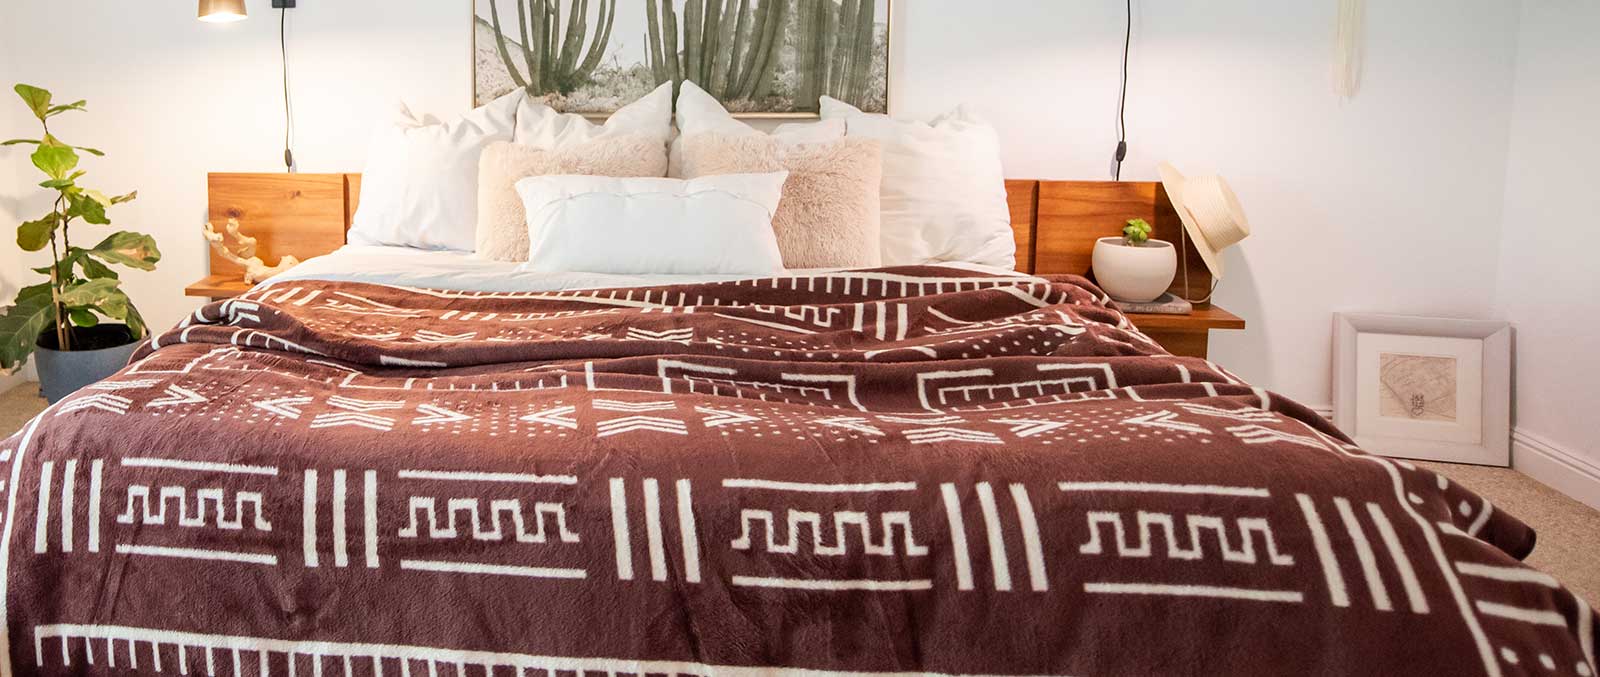 Patterned Blankets and Throws